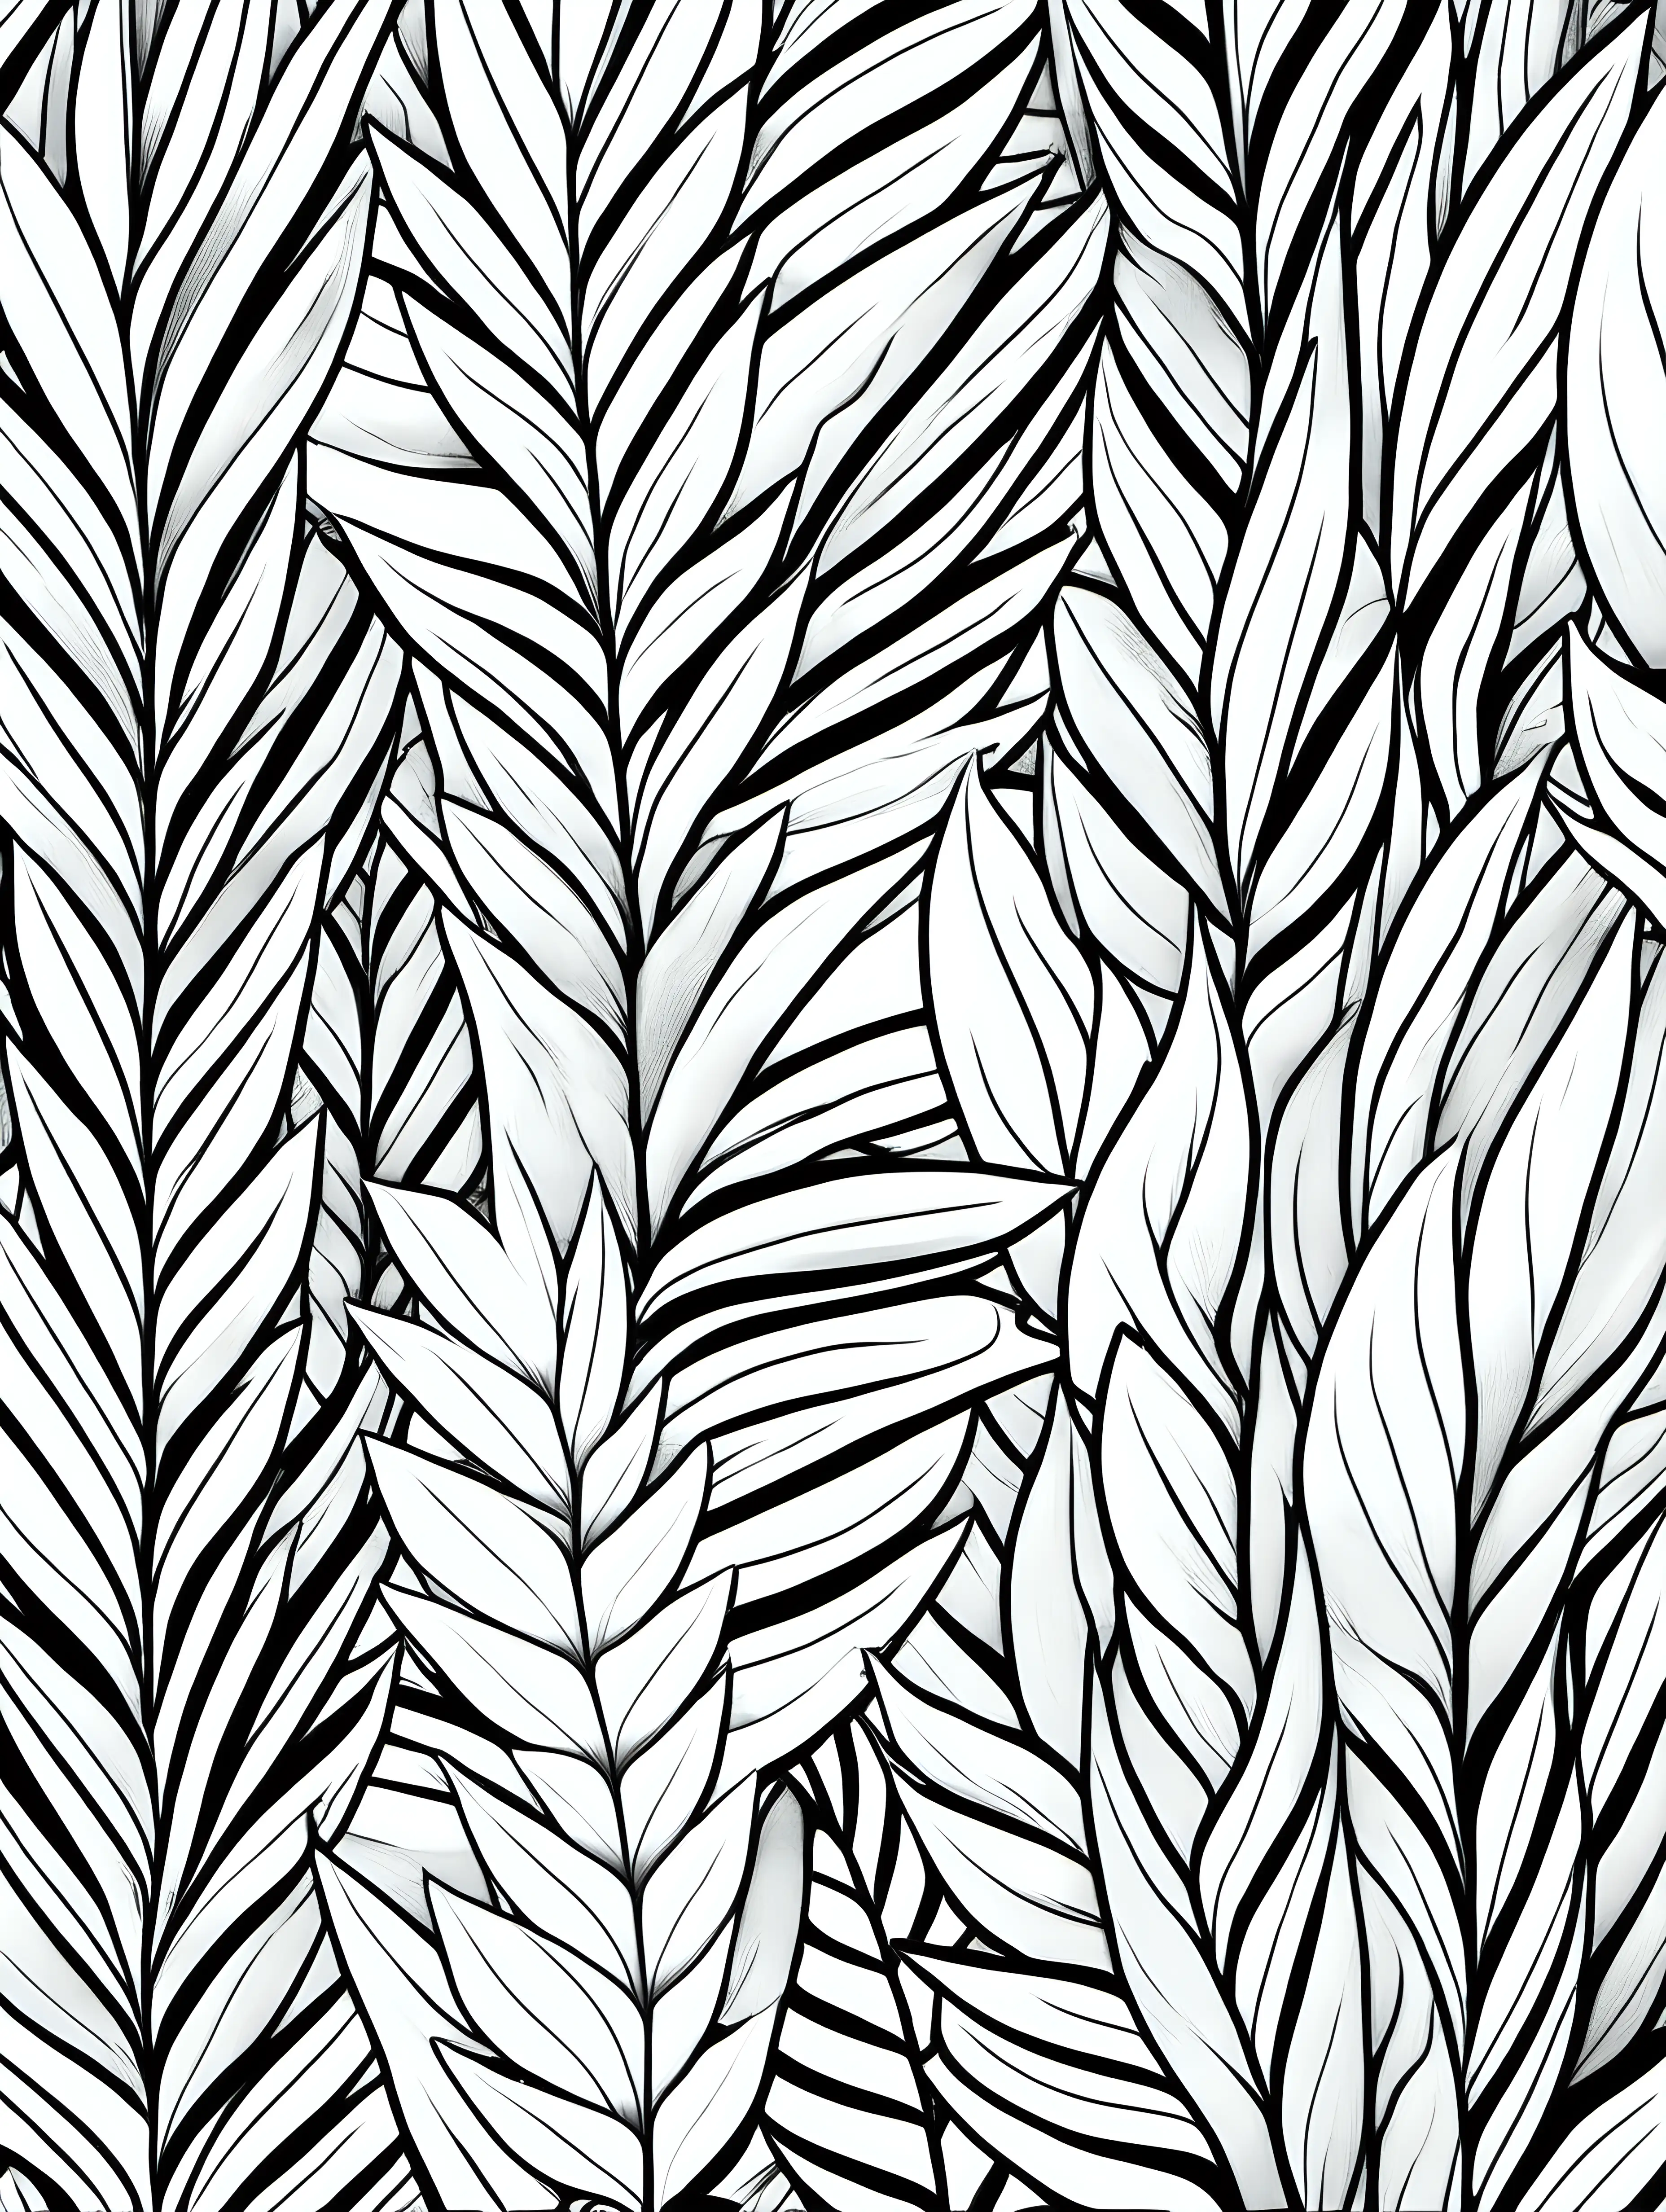 coloring page, simple leaves repeating pattern, black and white, no shadows